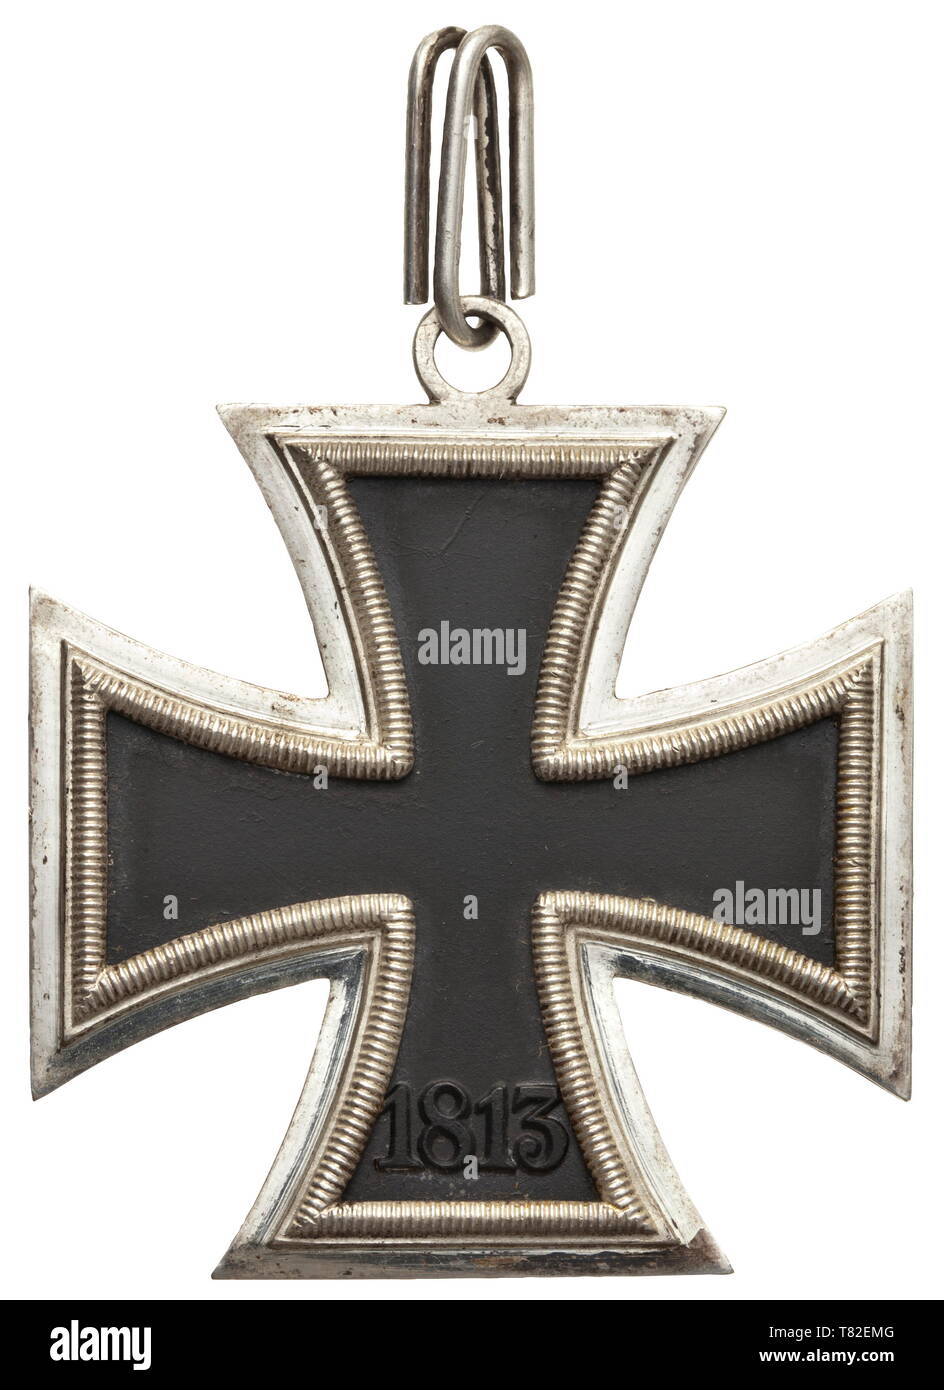 A Knight´s Cross of the Iron Cross by maker Otto Schickle Nickel silver frame, blackened iron core, unmarked suspension ring typical of Schickle, the obverse of the eyelet with LDO punch mark 'L/15'. Weight 24.8 g. Dimensions without suspension ring 49 x 49 mm. Certainly one of the rarest Knight´s Crosses, Otto Schickle produced these awards for just a short period of time (most probably only until 1941), thus these crosses are hardly ever seen on the market. Cf. Dietrich Maerz, 'Das Ritterkreuz des Eisernen Kreuzes und seine Höheren Stufen'. historic, historical, awards, a, Editorial-Use-Only Stock Photo